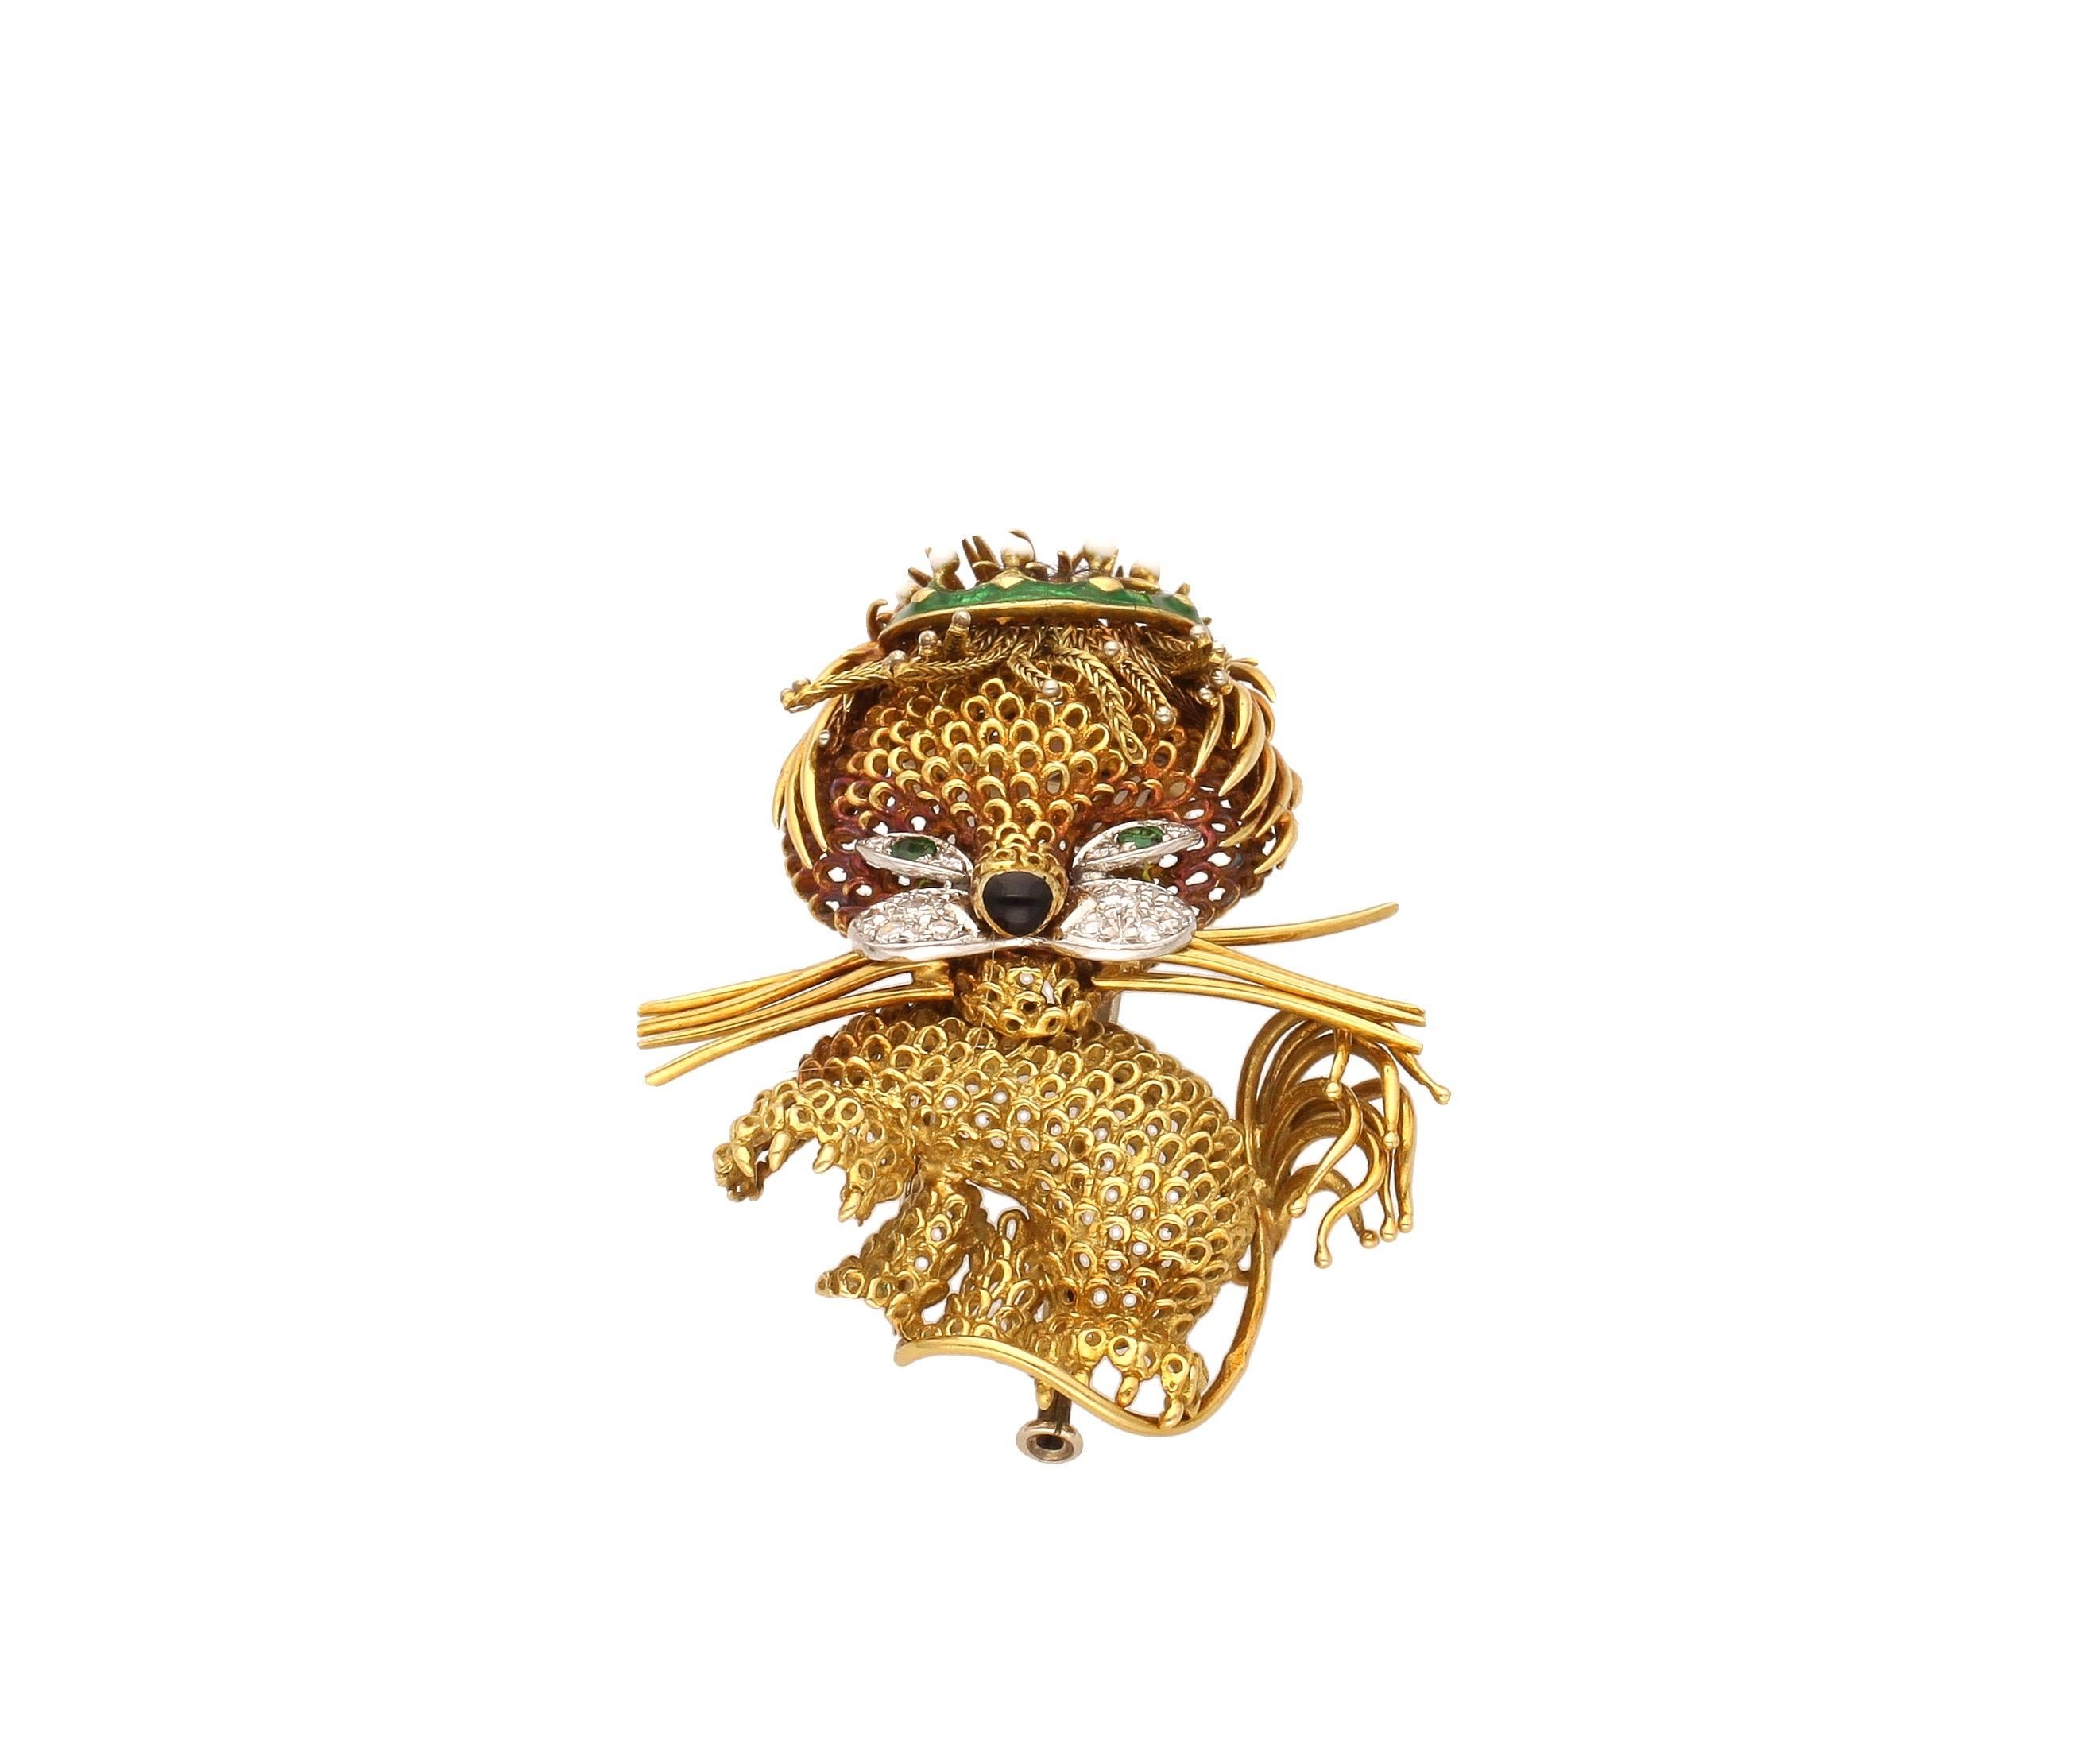 18 kt. yellow gold brooch with 0.40 carat of round-cut diamonds, enamel and 0.08 carat of emeralds round-cut.
This funny brooch is from 1950 circa, hand-made in Italy.